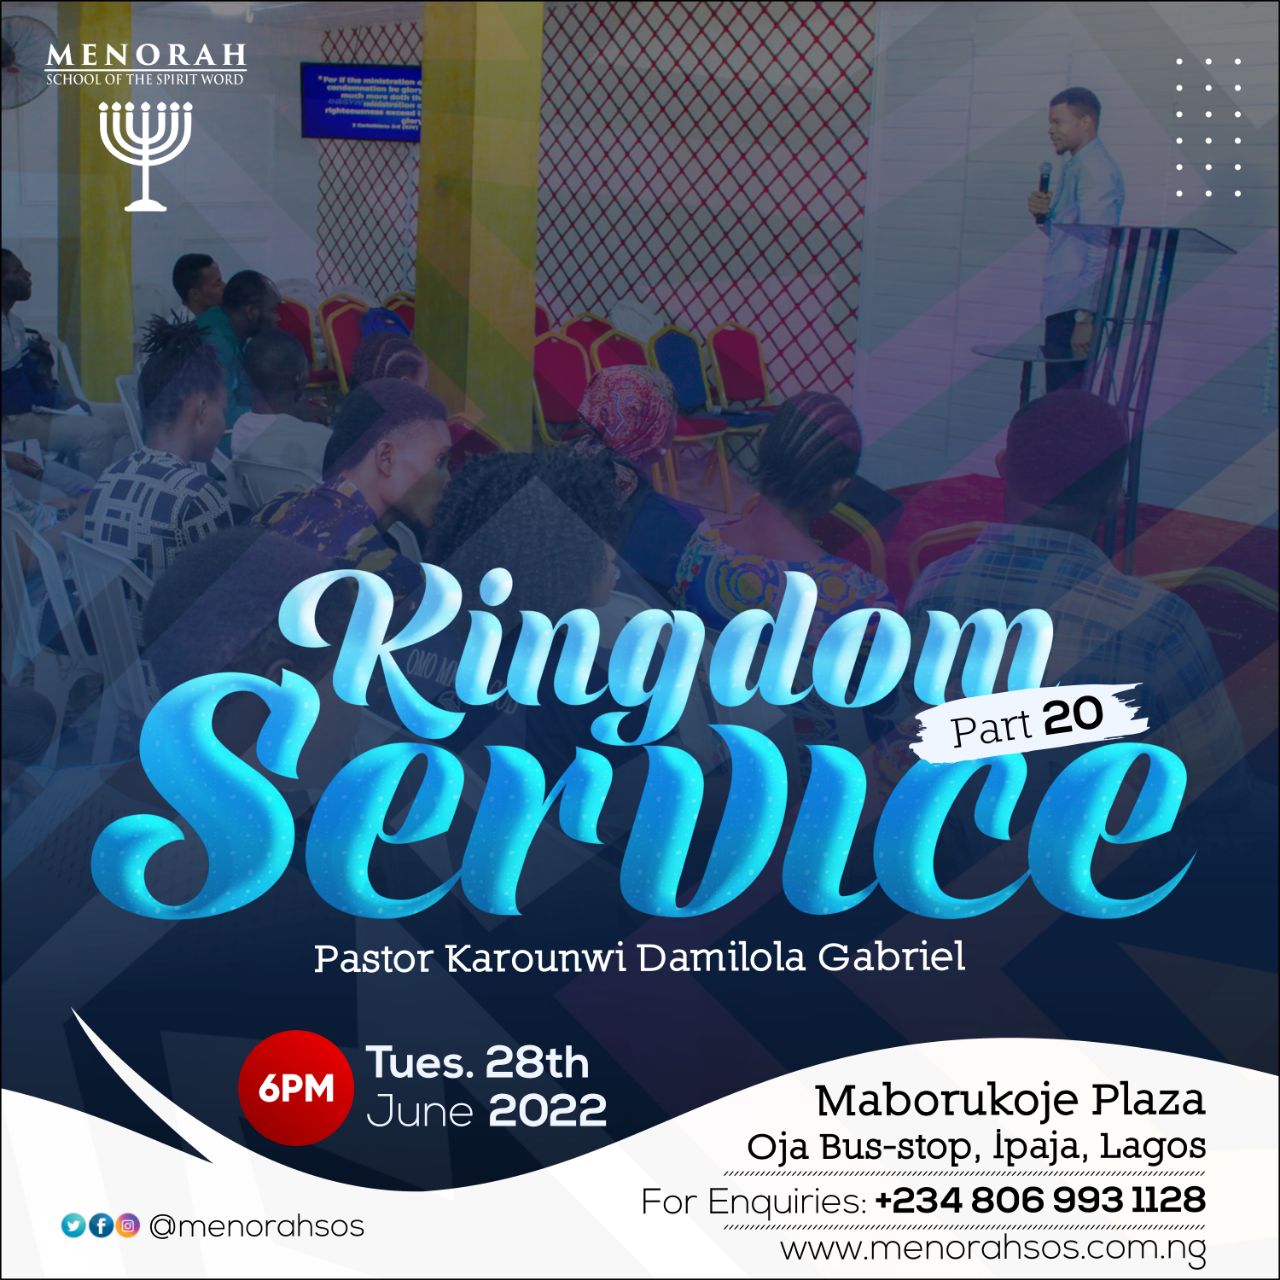 You are currently viewing Kingdom Service (Part 20)